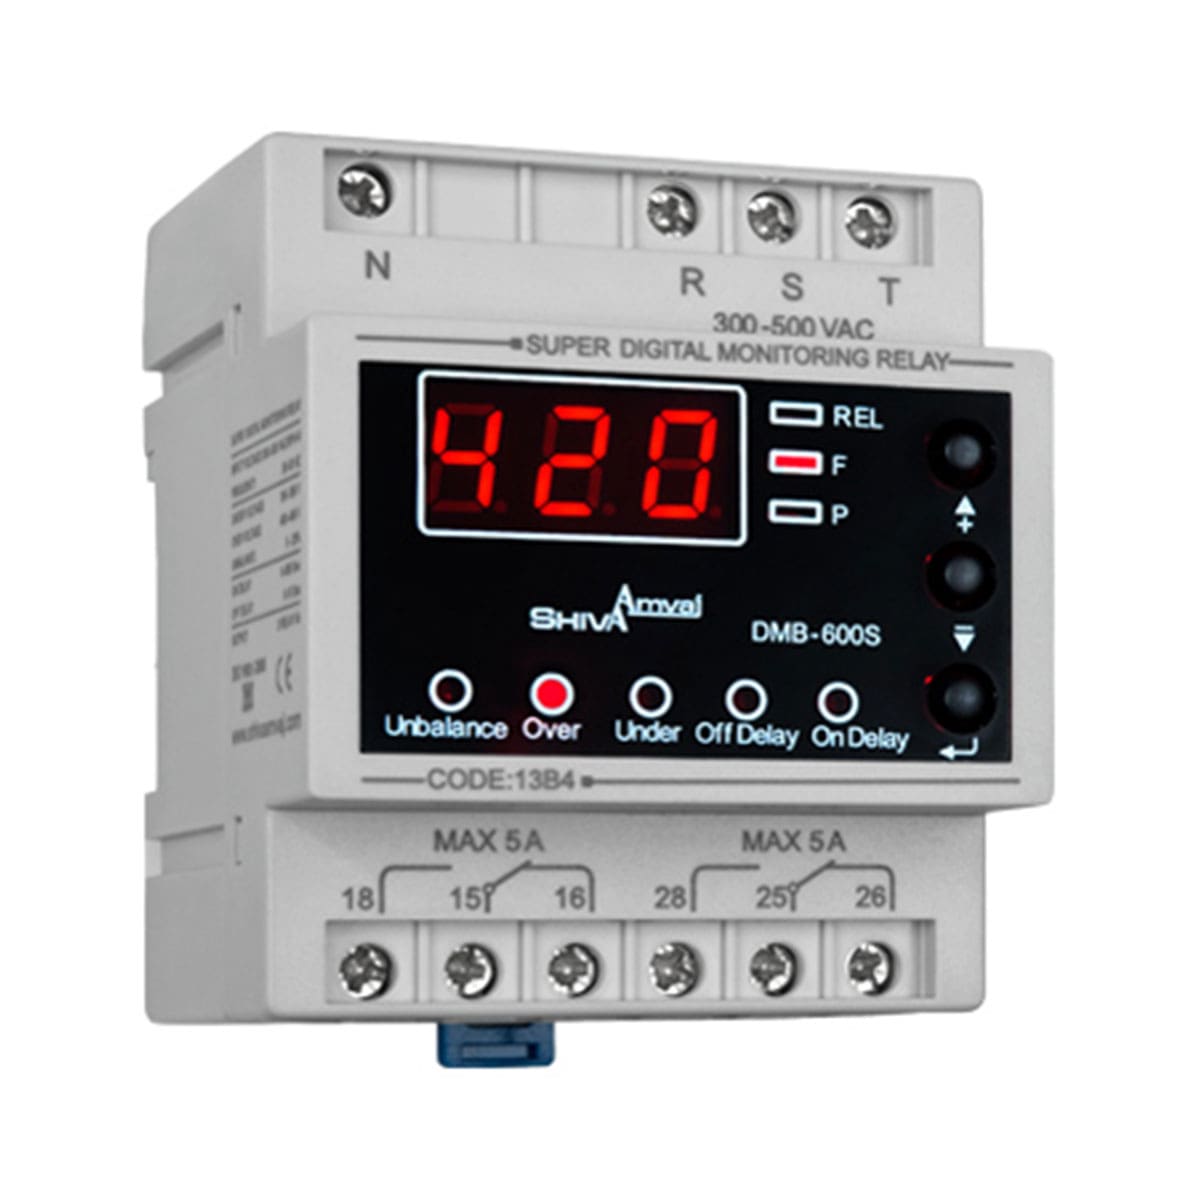 Digital Load Monitor Market Analysis, Key Trends, Growth Opportunities, Challenges and Key Players by 2032